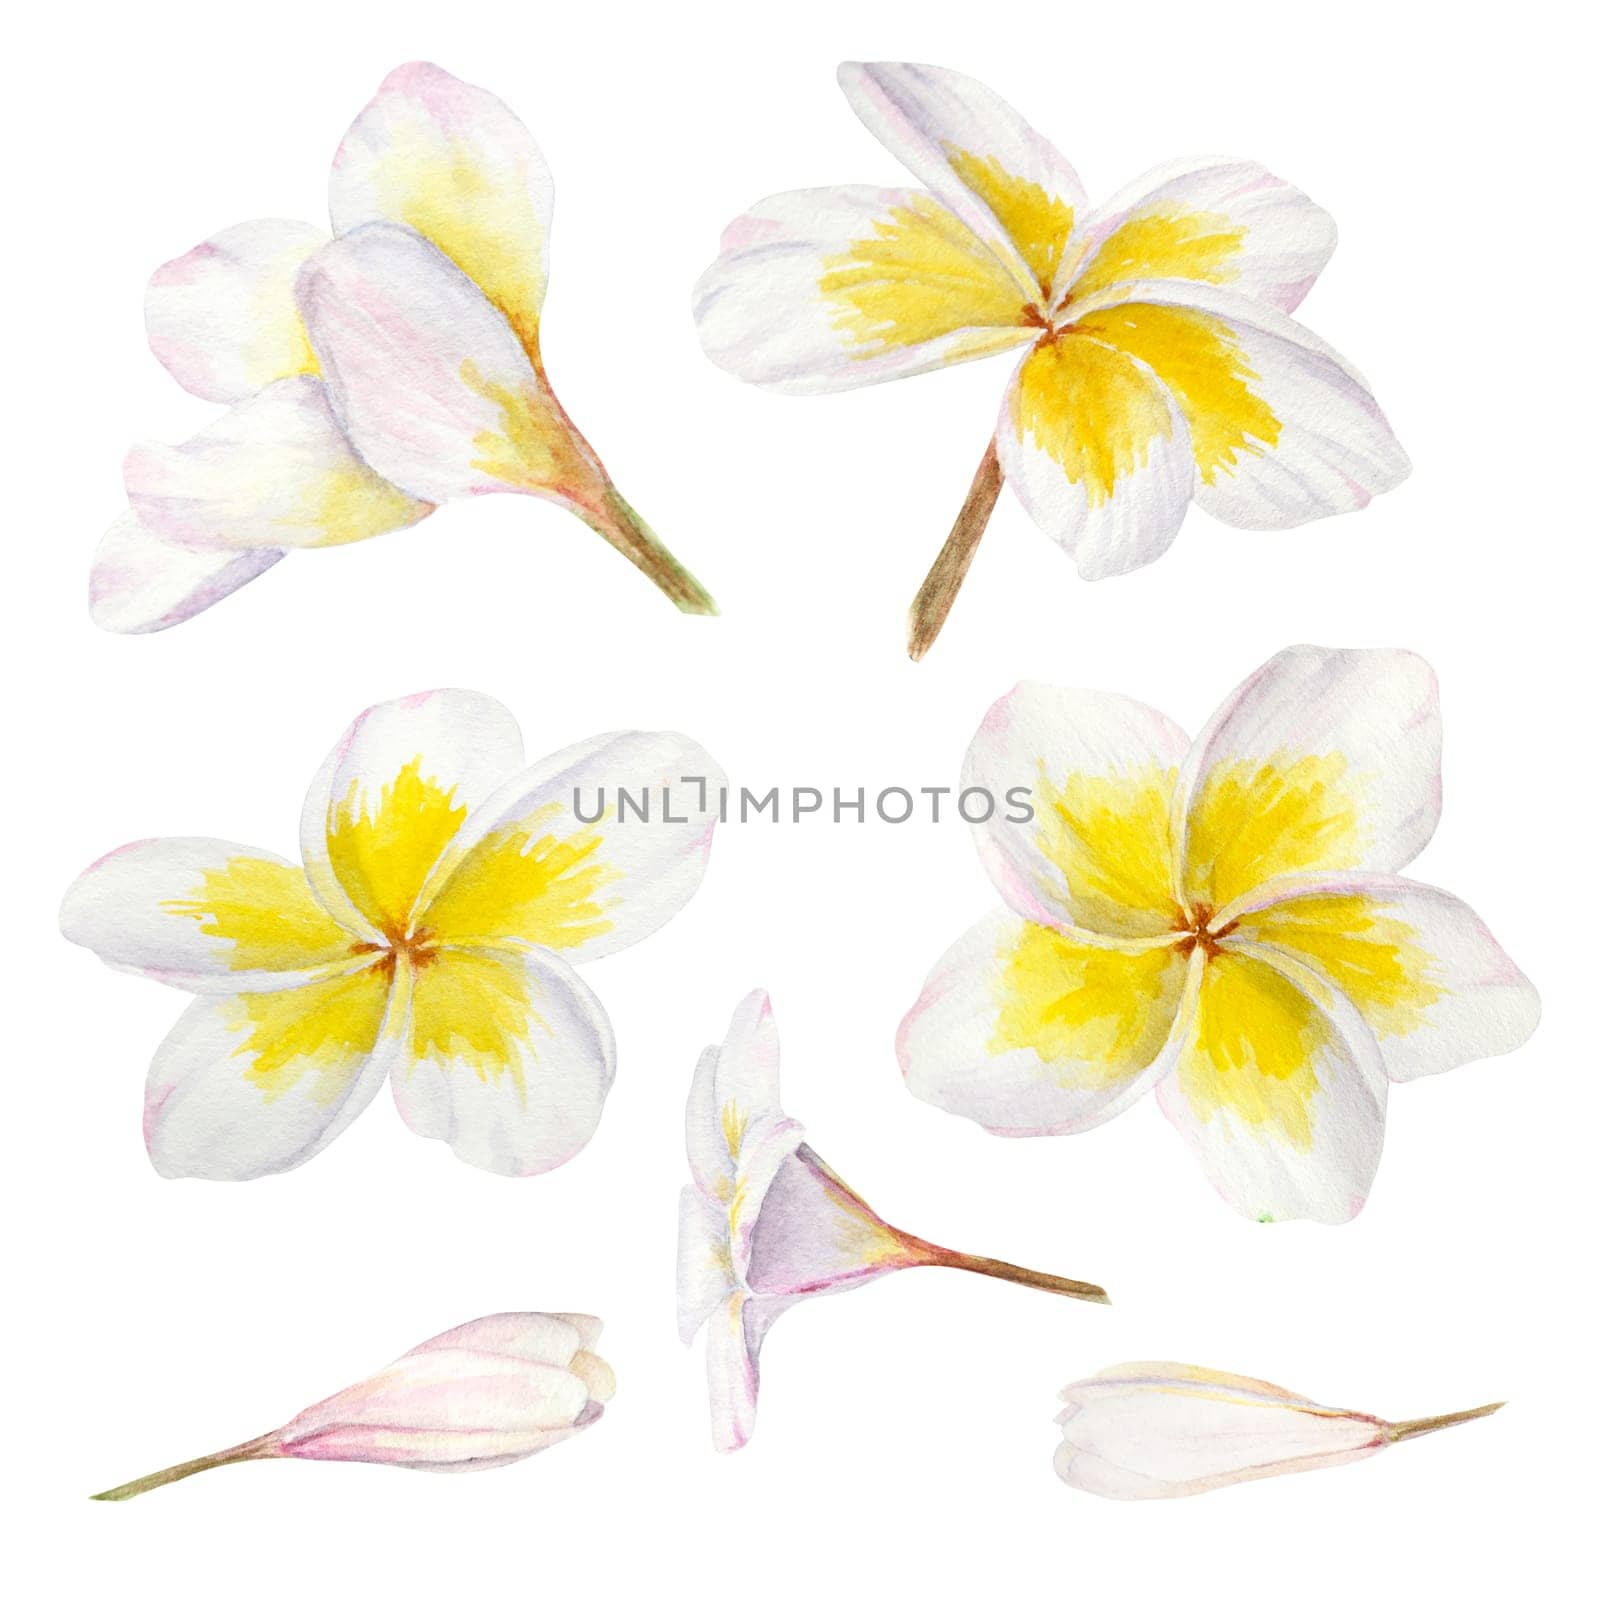 White frangipani illustration. Watercolor hand drawn clip art of exotic flower plumeria. Tropical painting for wedding invitations, spa and massage salon prints, cosmetic packing, travel guides.